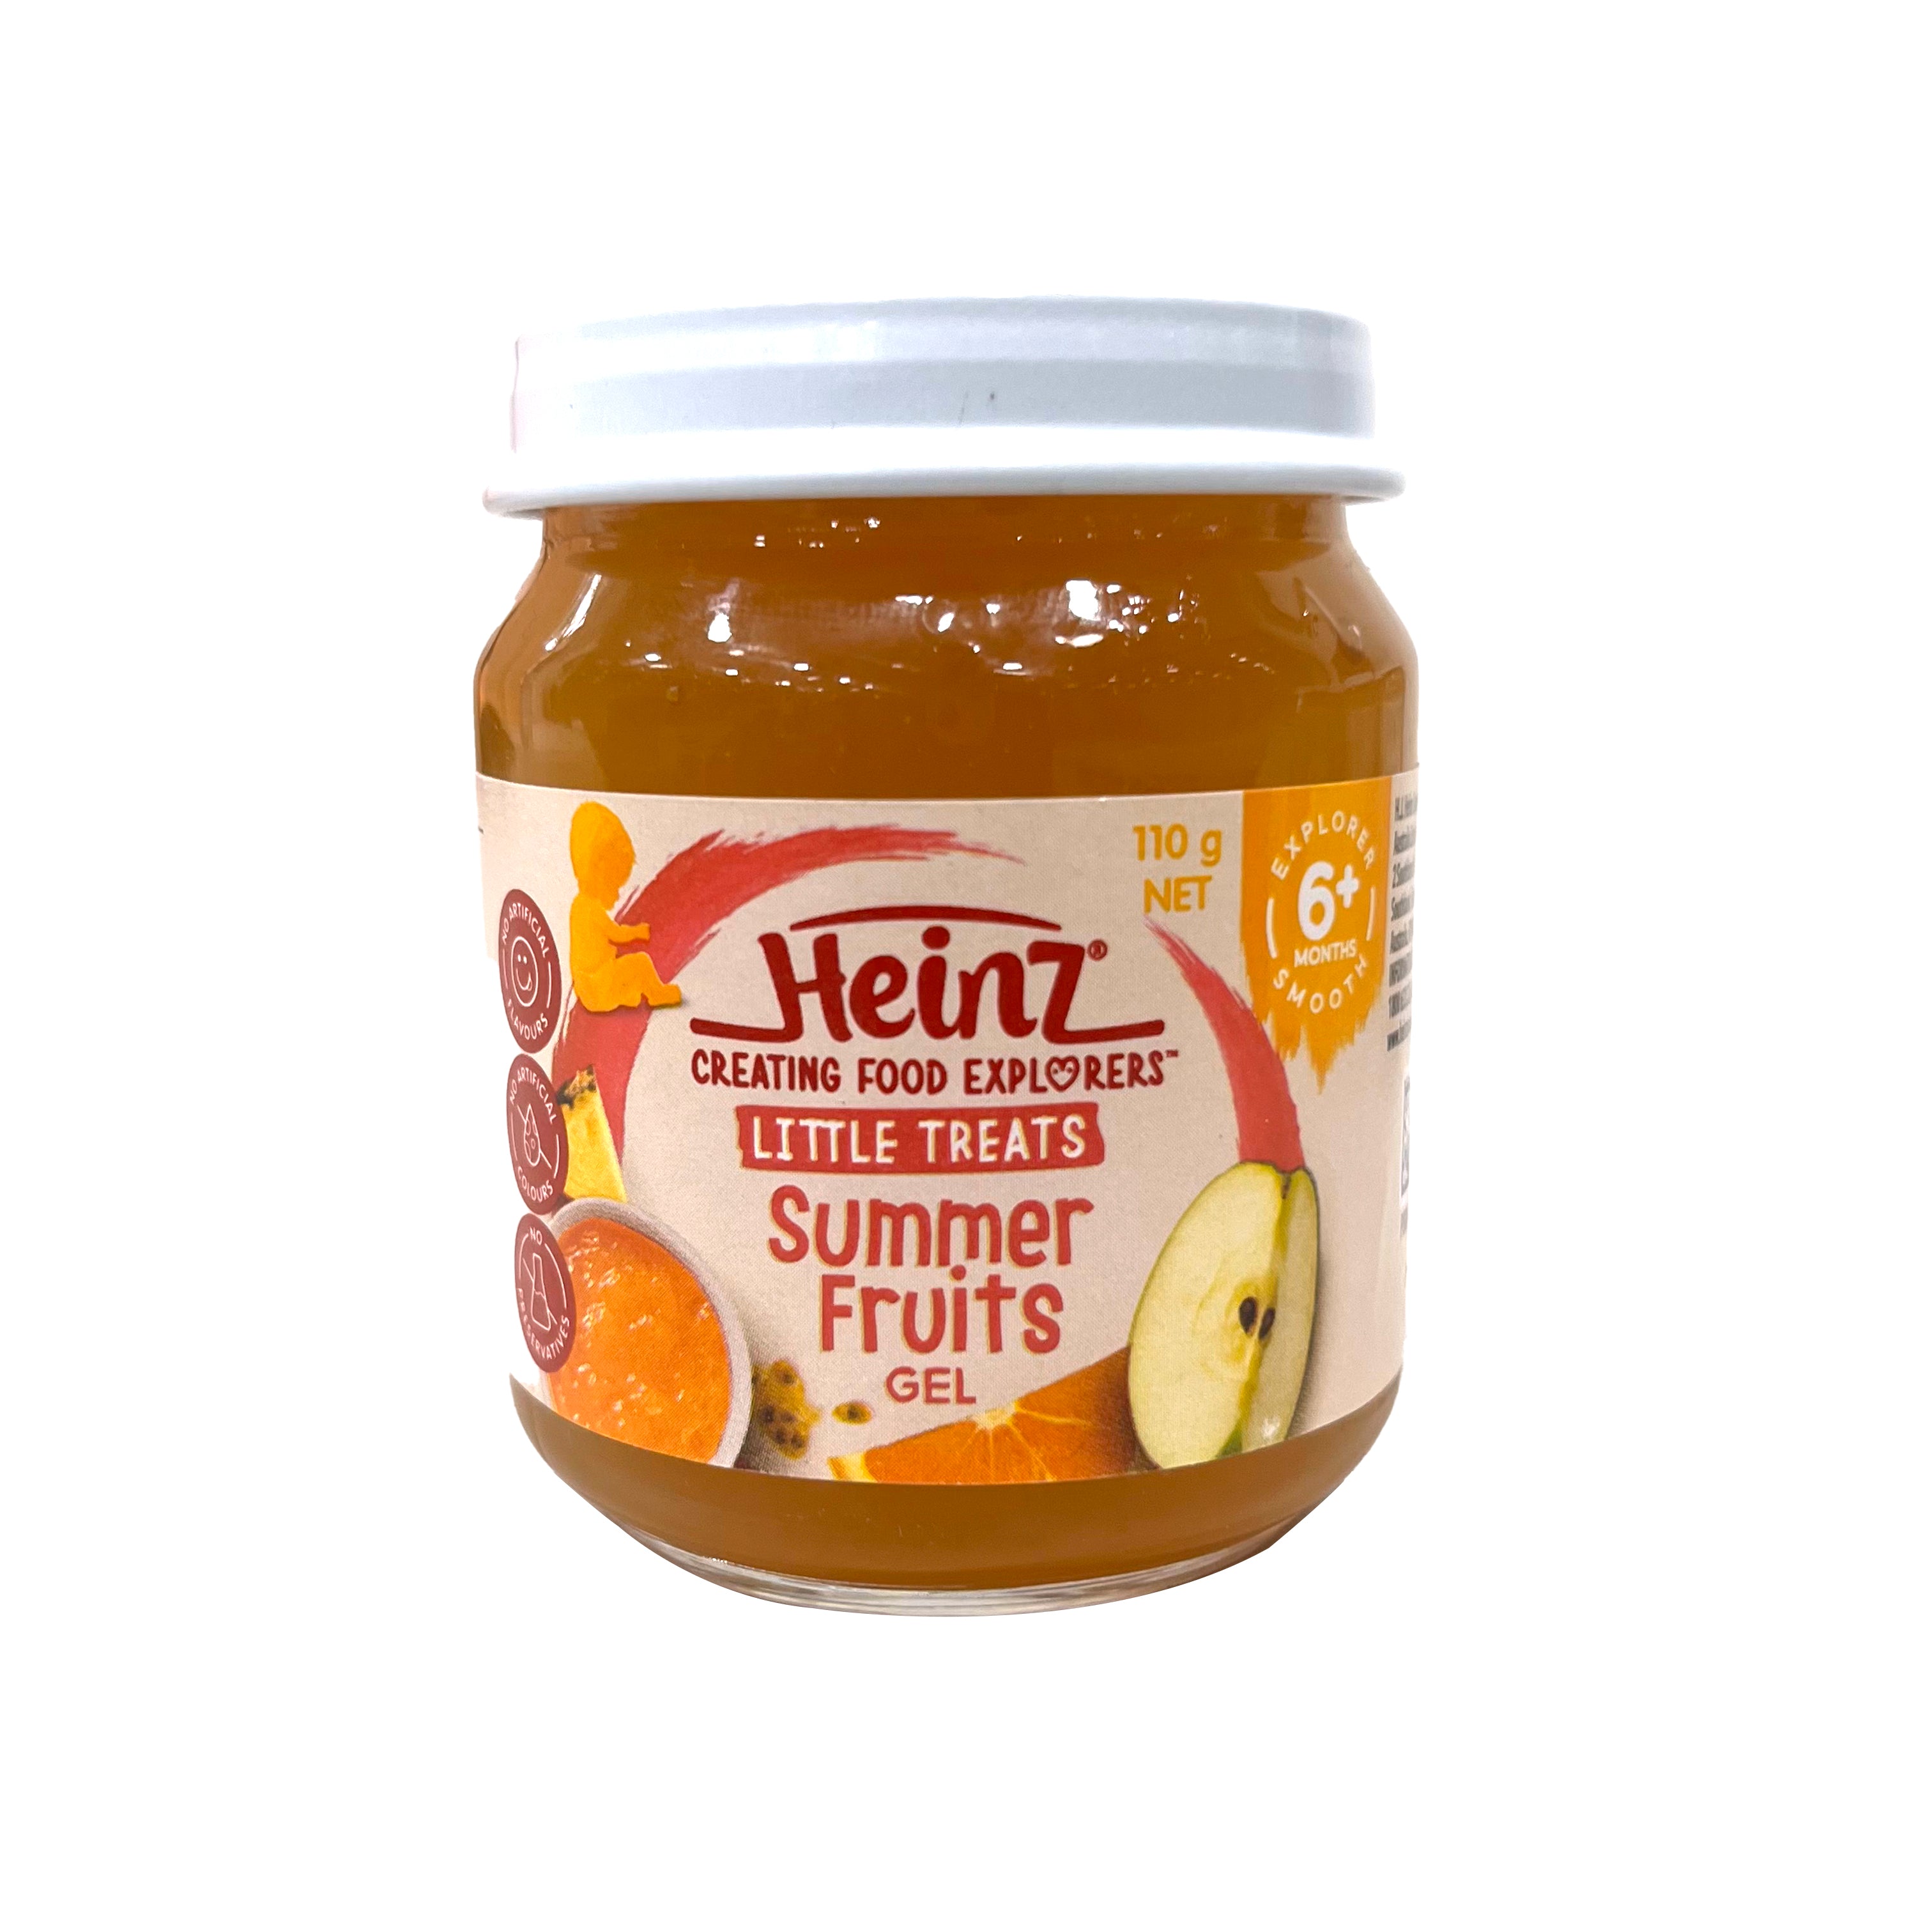 Buy Heinz Summer Fruits Gel Puree for your Baby, 6+months, 110gms Online in India at uyyaala.com